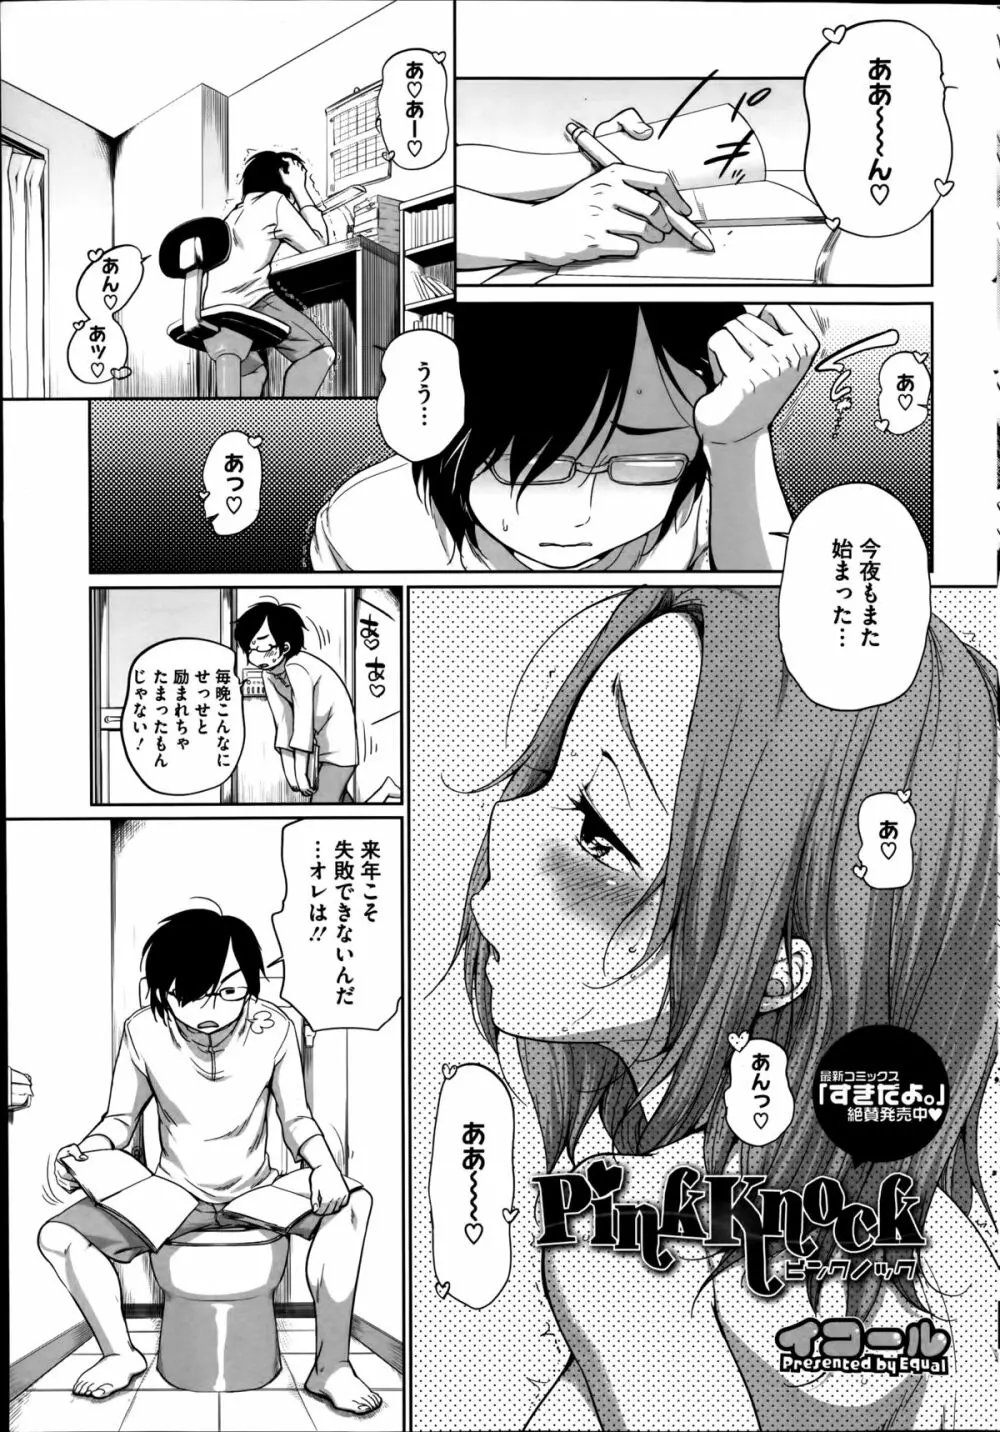 PinkKnock 第1-2章 Page.1